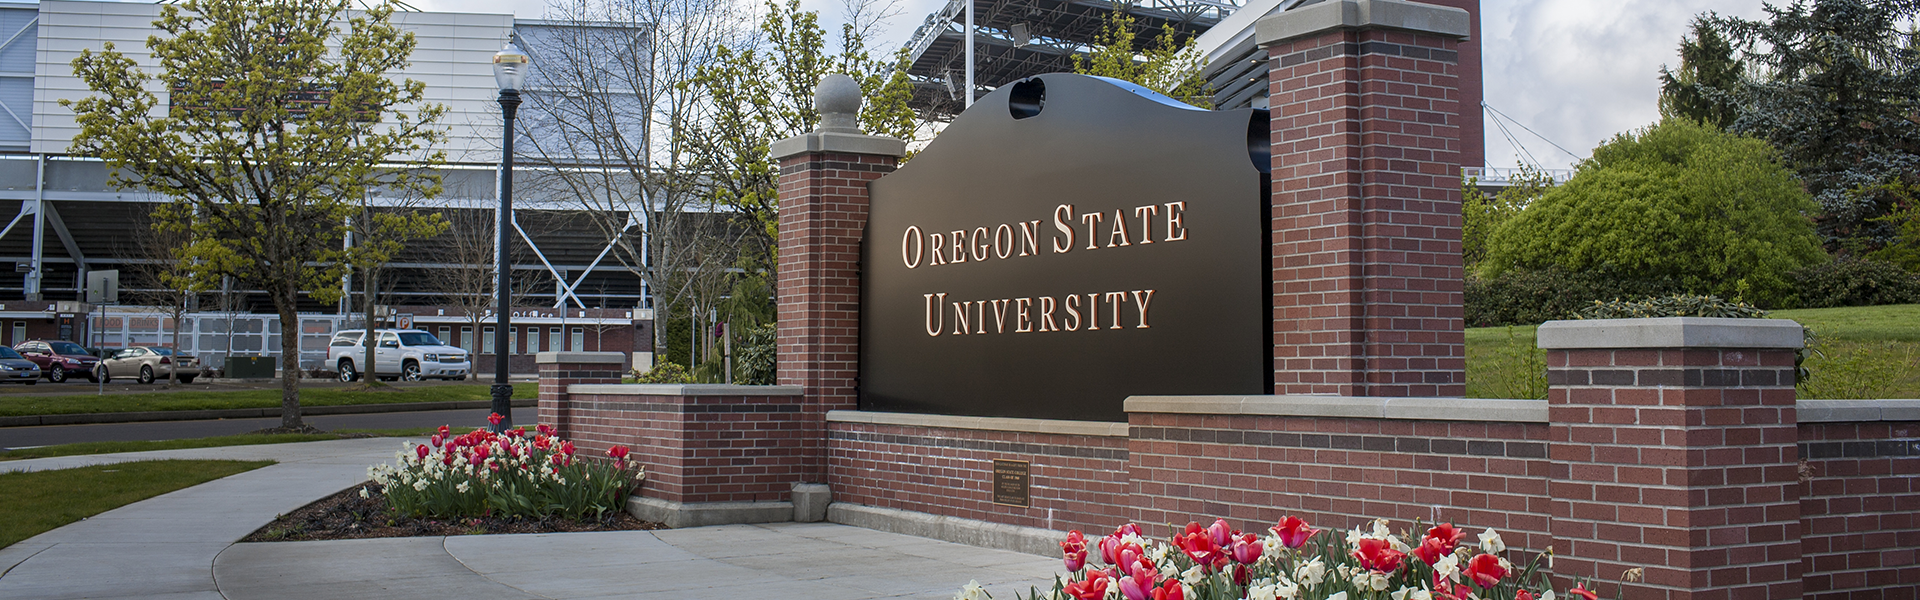 The Oregon State University sign surrounded by a brick structure with flower beds below